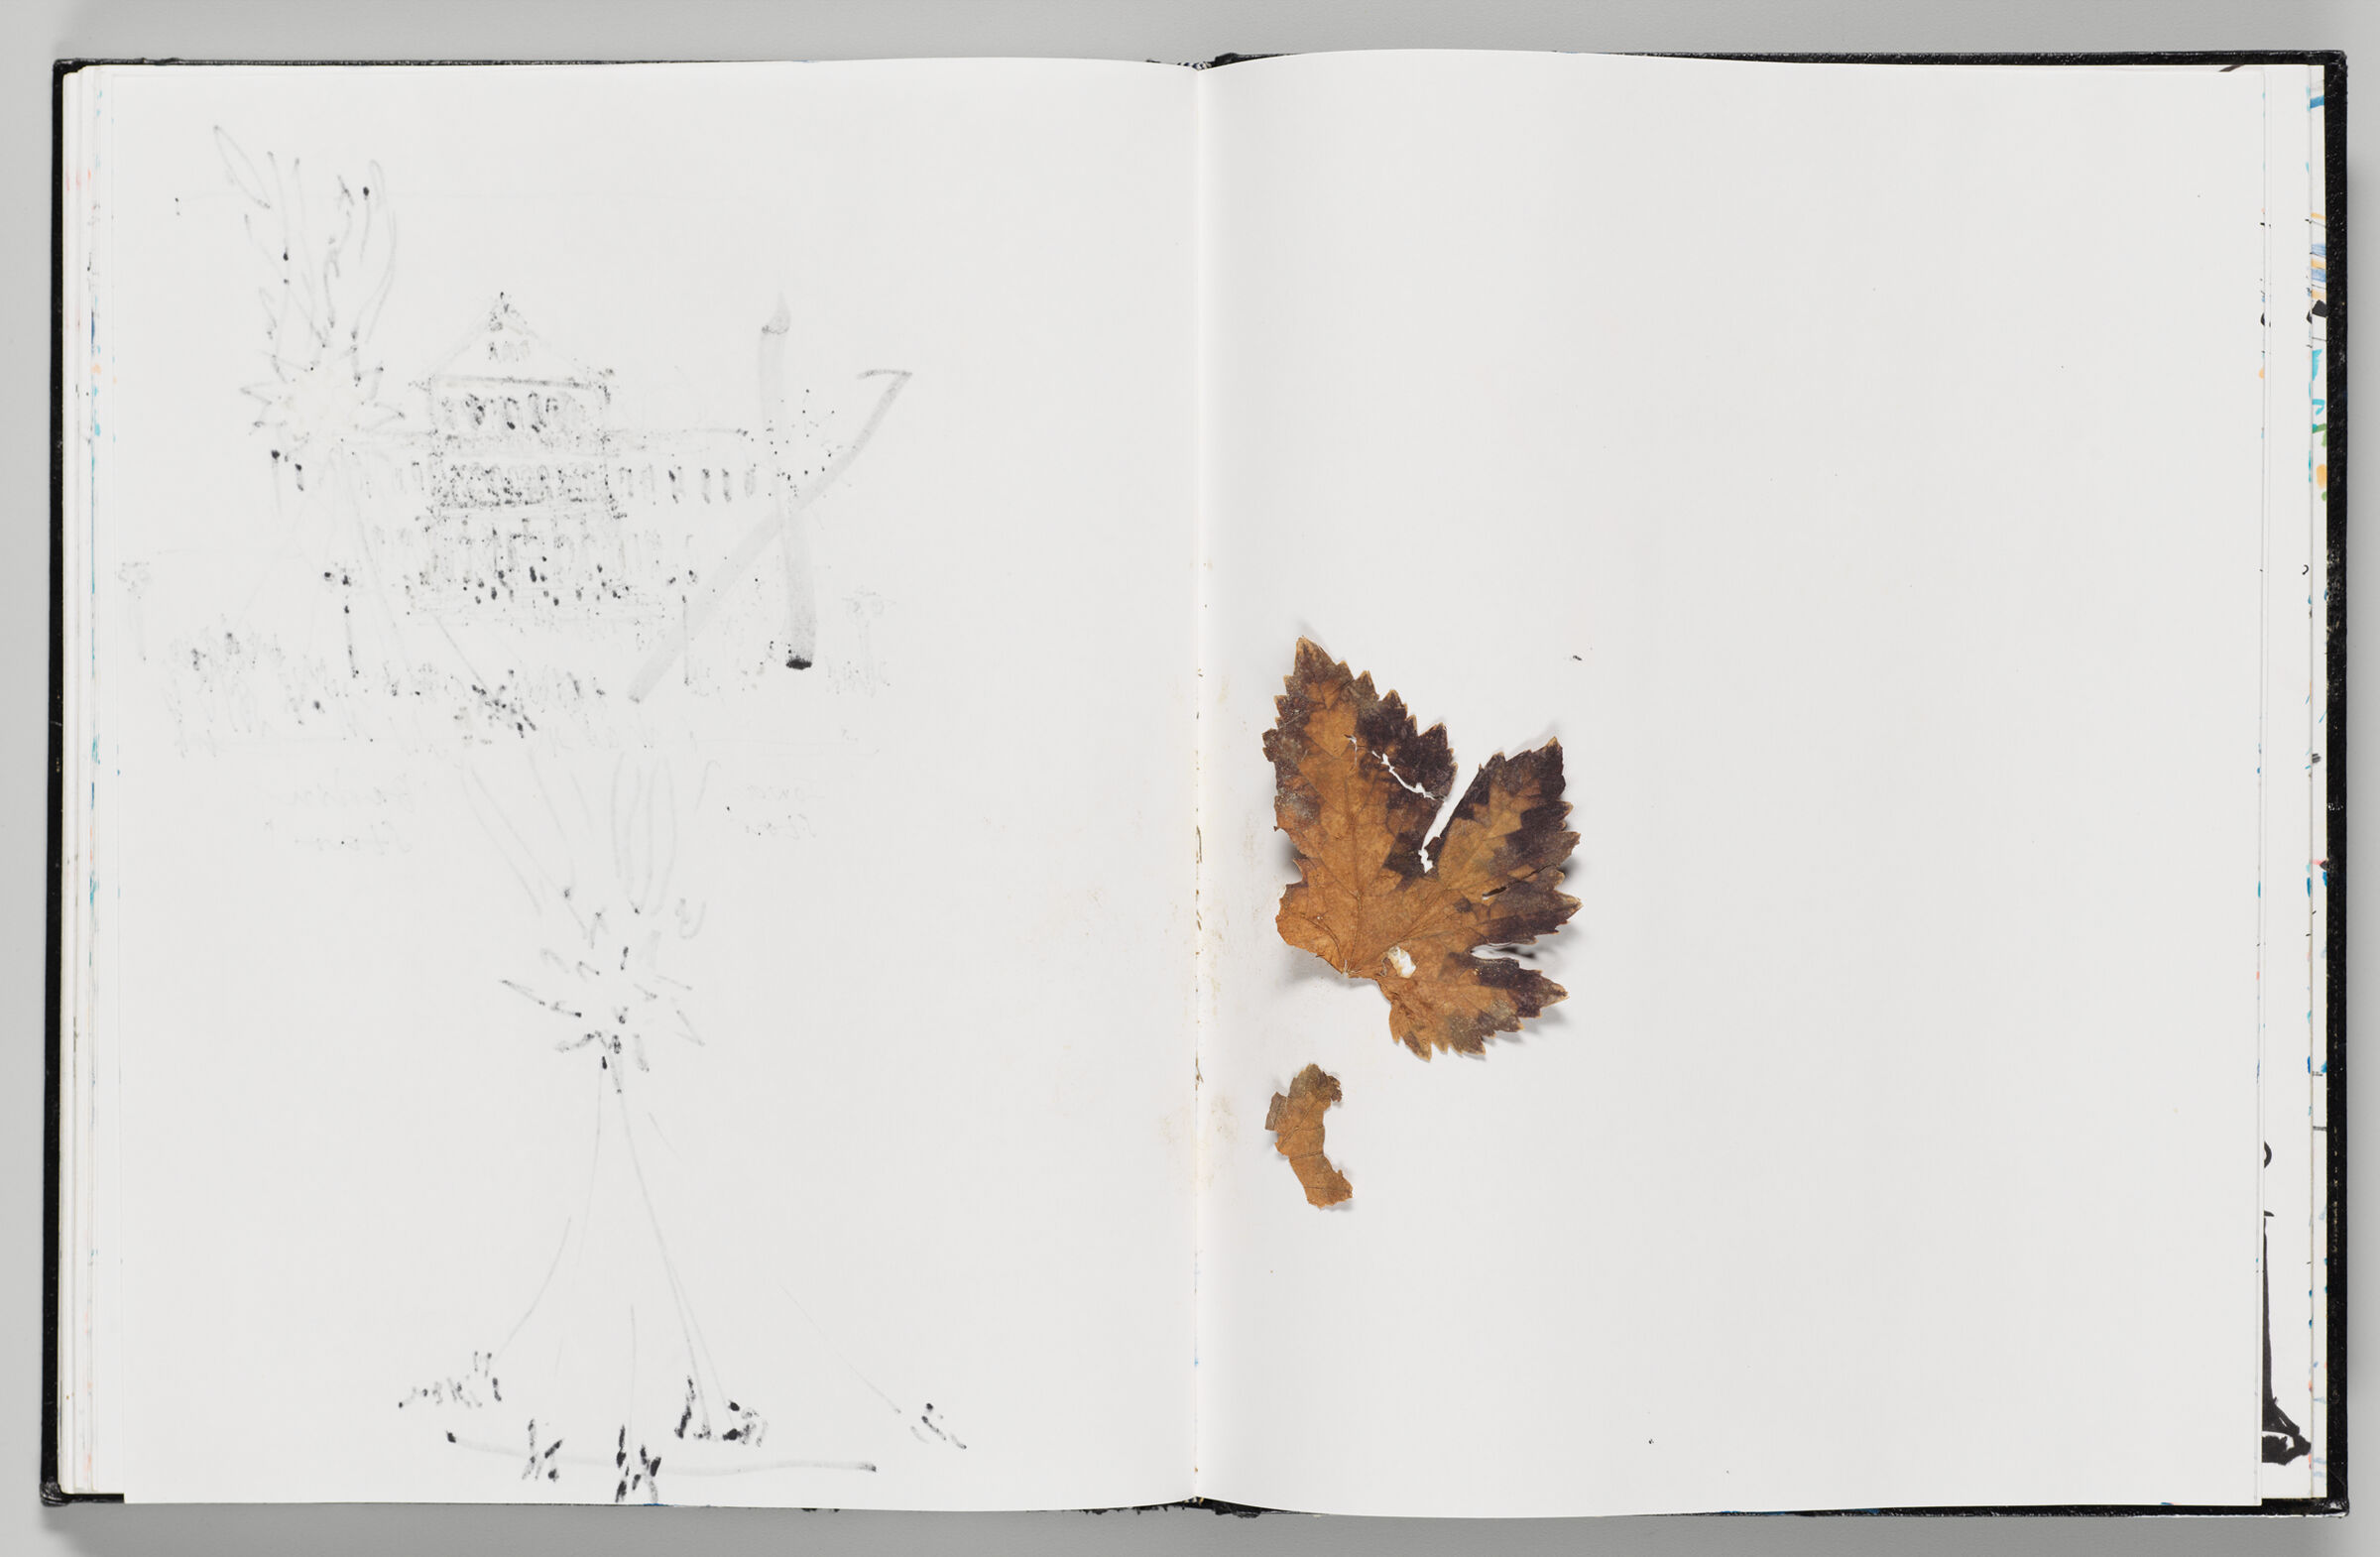 Untitled (Bleed-Through From Previous Page, Left Page); Untitled (Blank, Right Page)